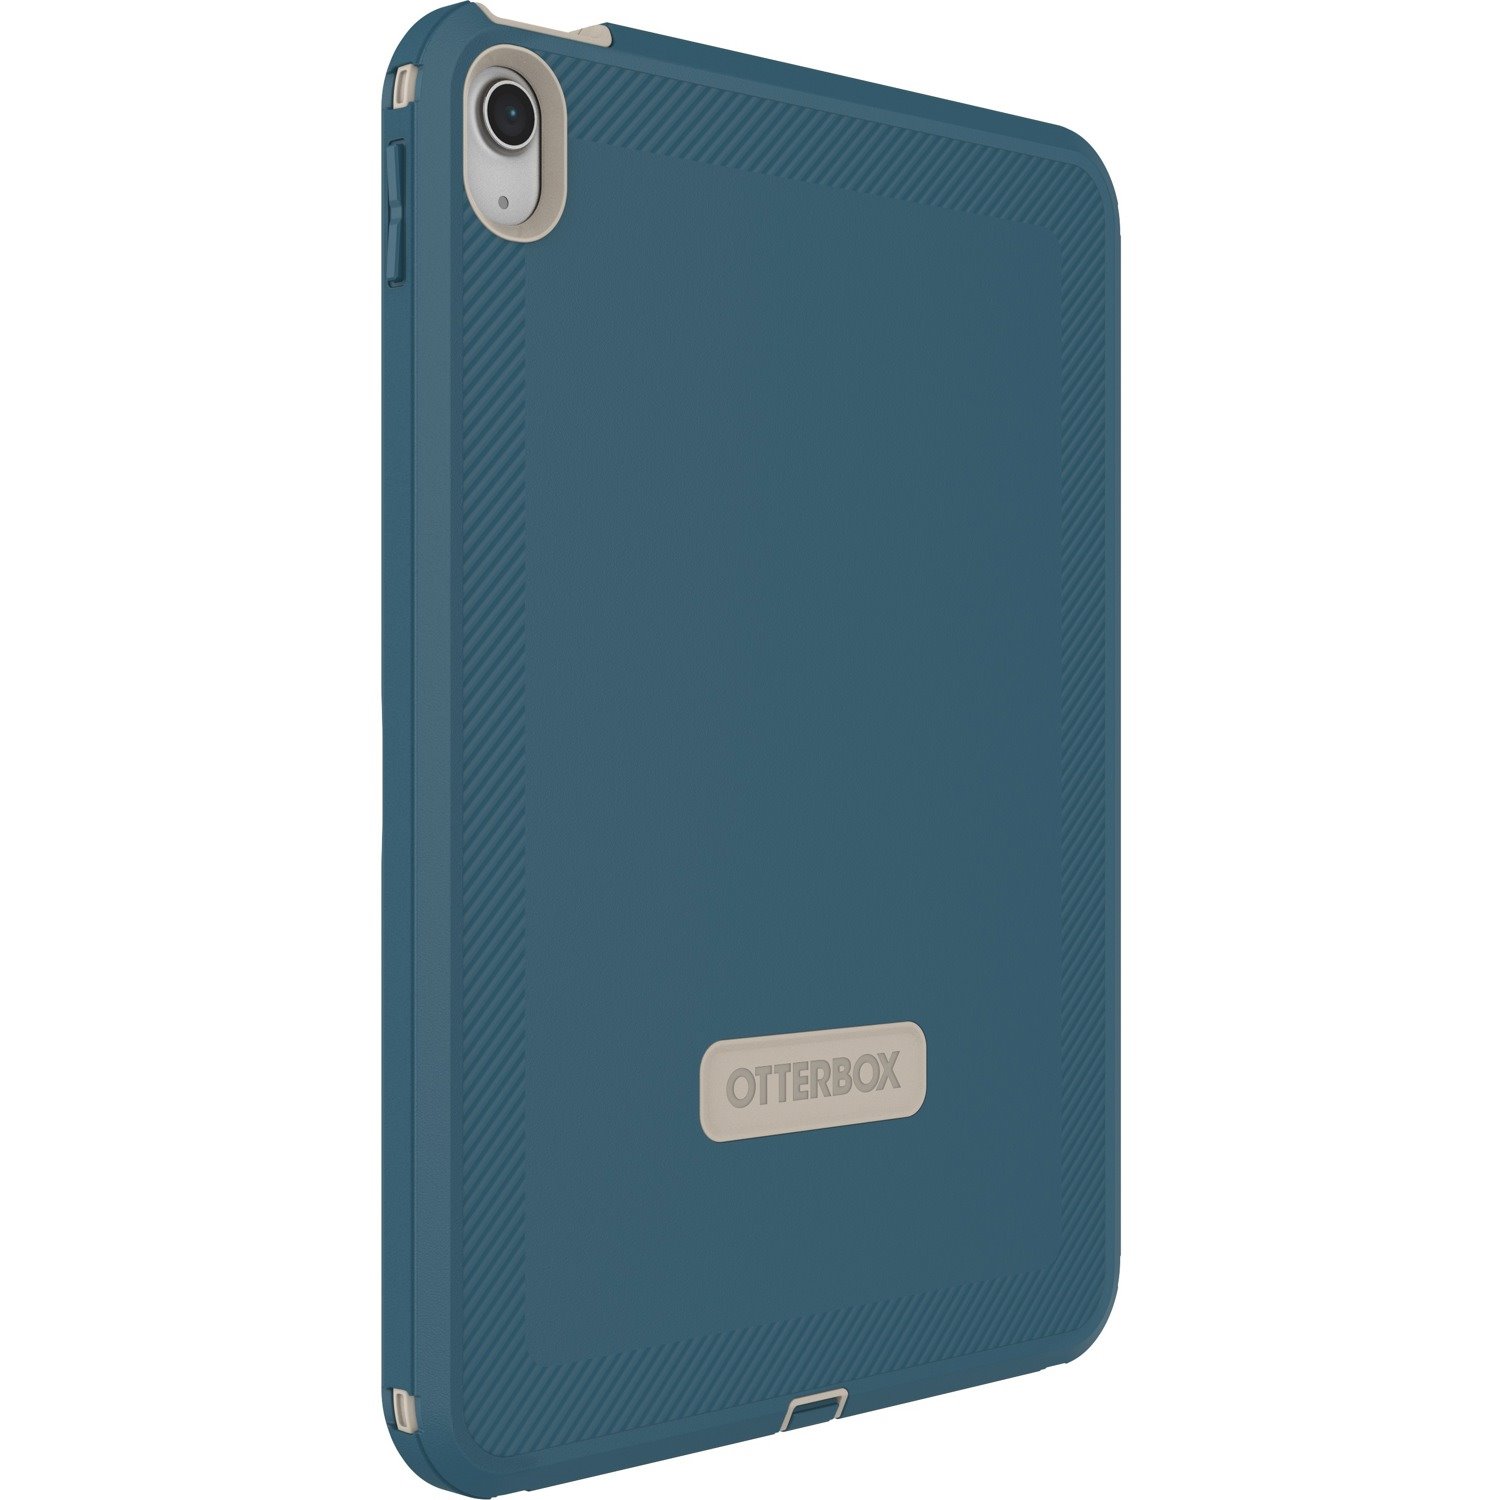 OtterBox Defender Case for Apple iPad Tablet